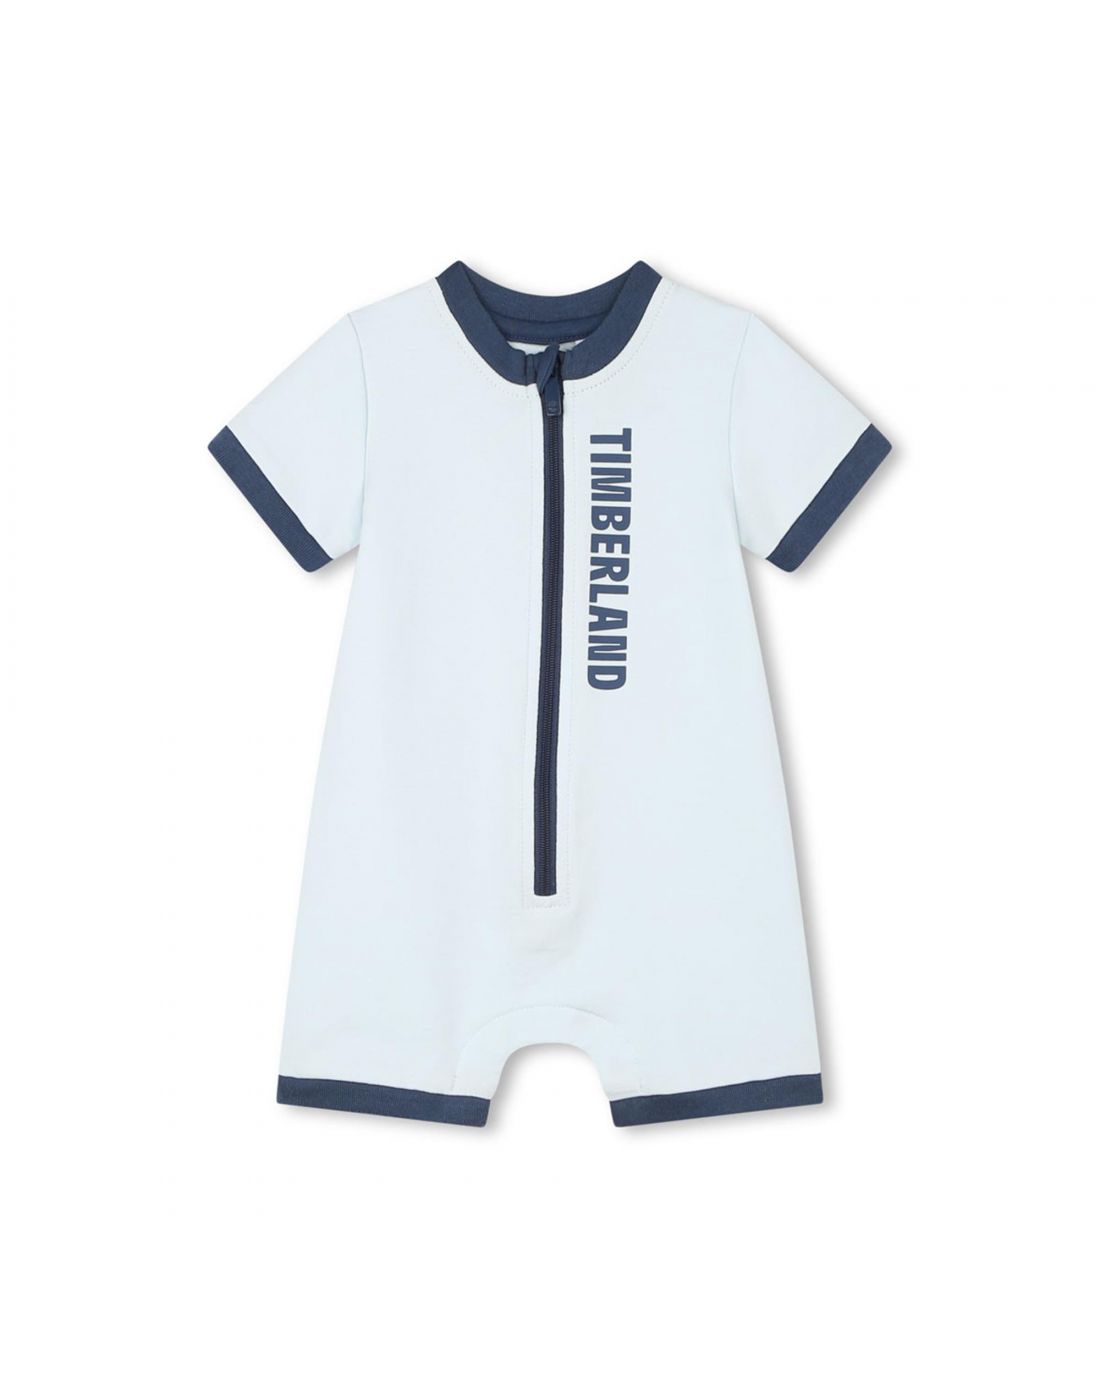 Timberland Baby Boys Jumpsuit